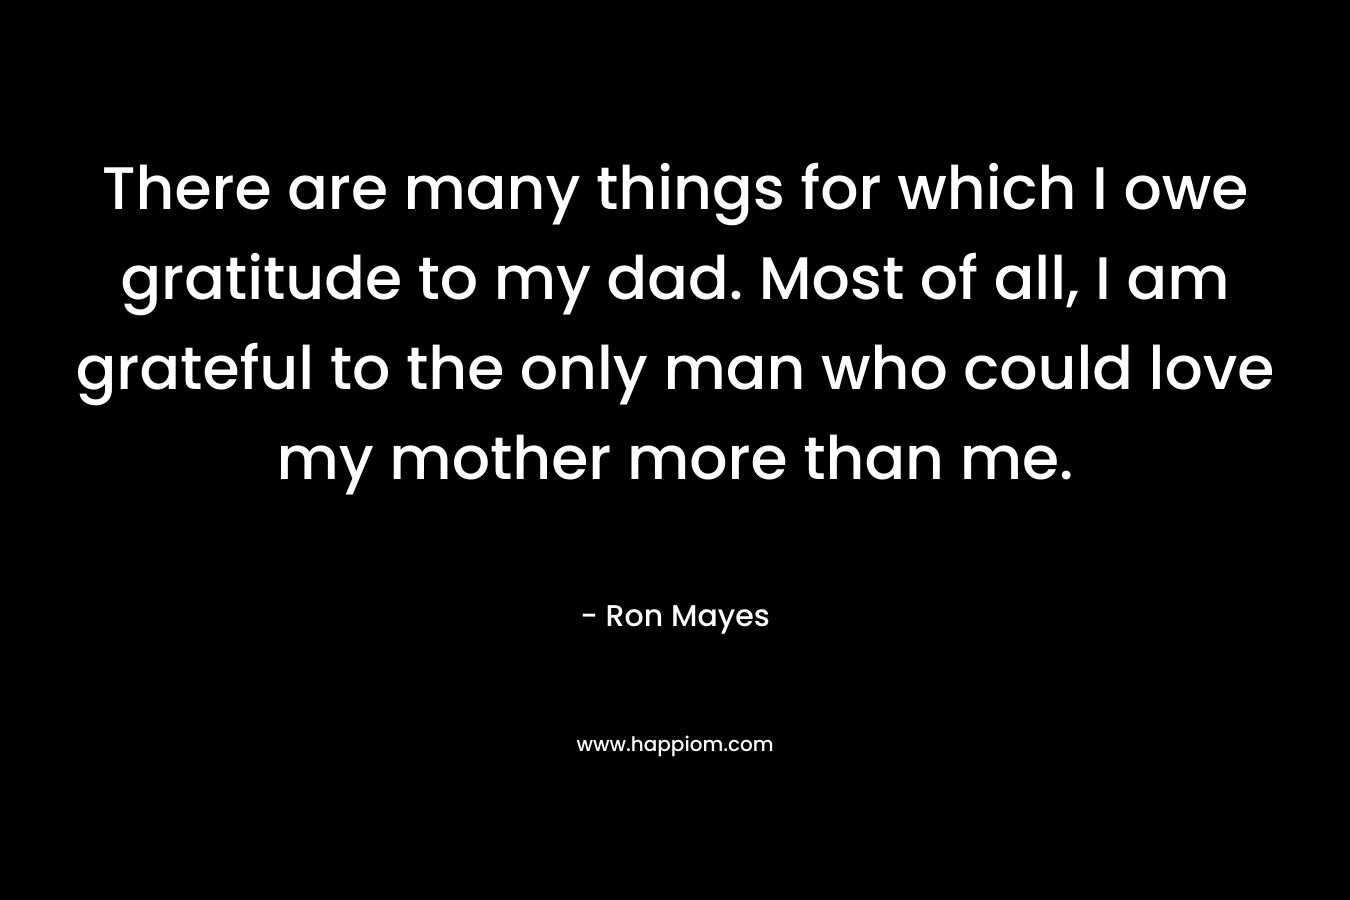 There are many things for which I owe gratitude to my dad. Most of all, I am grateful to the only man who could love my mother more than me. – Ron Mayes